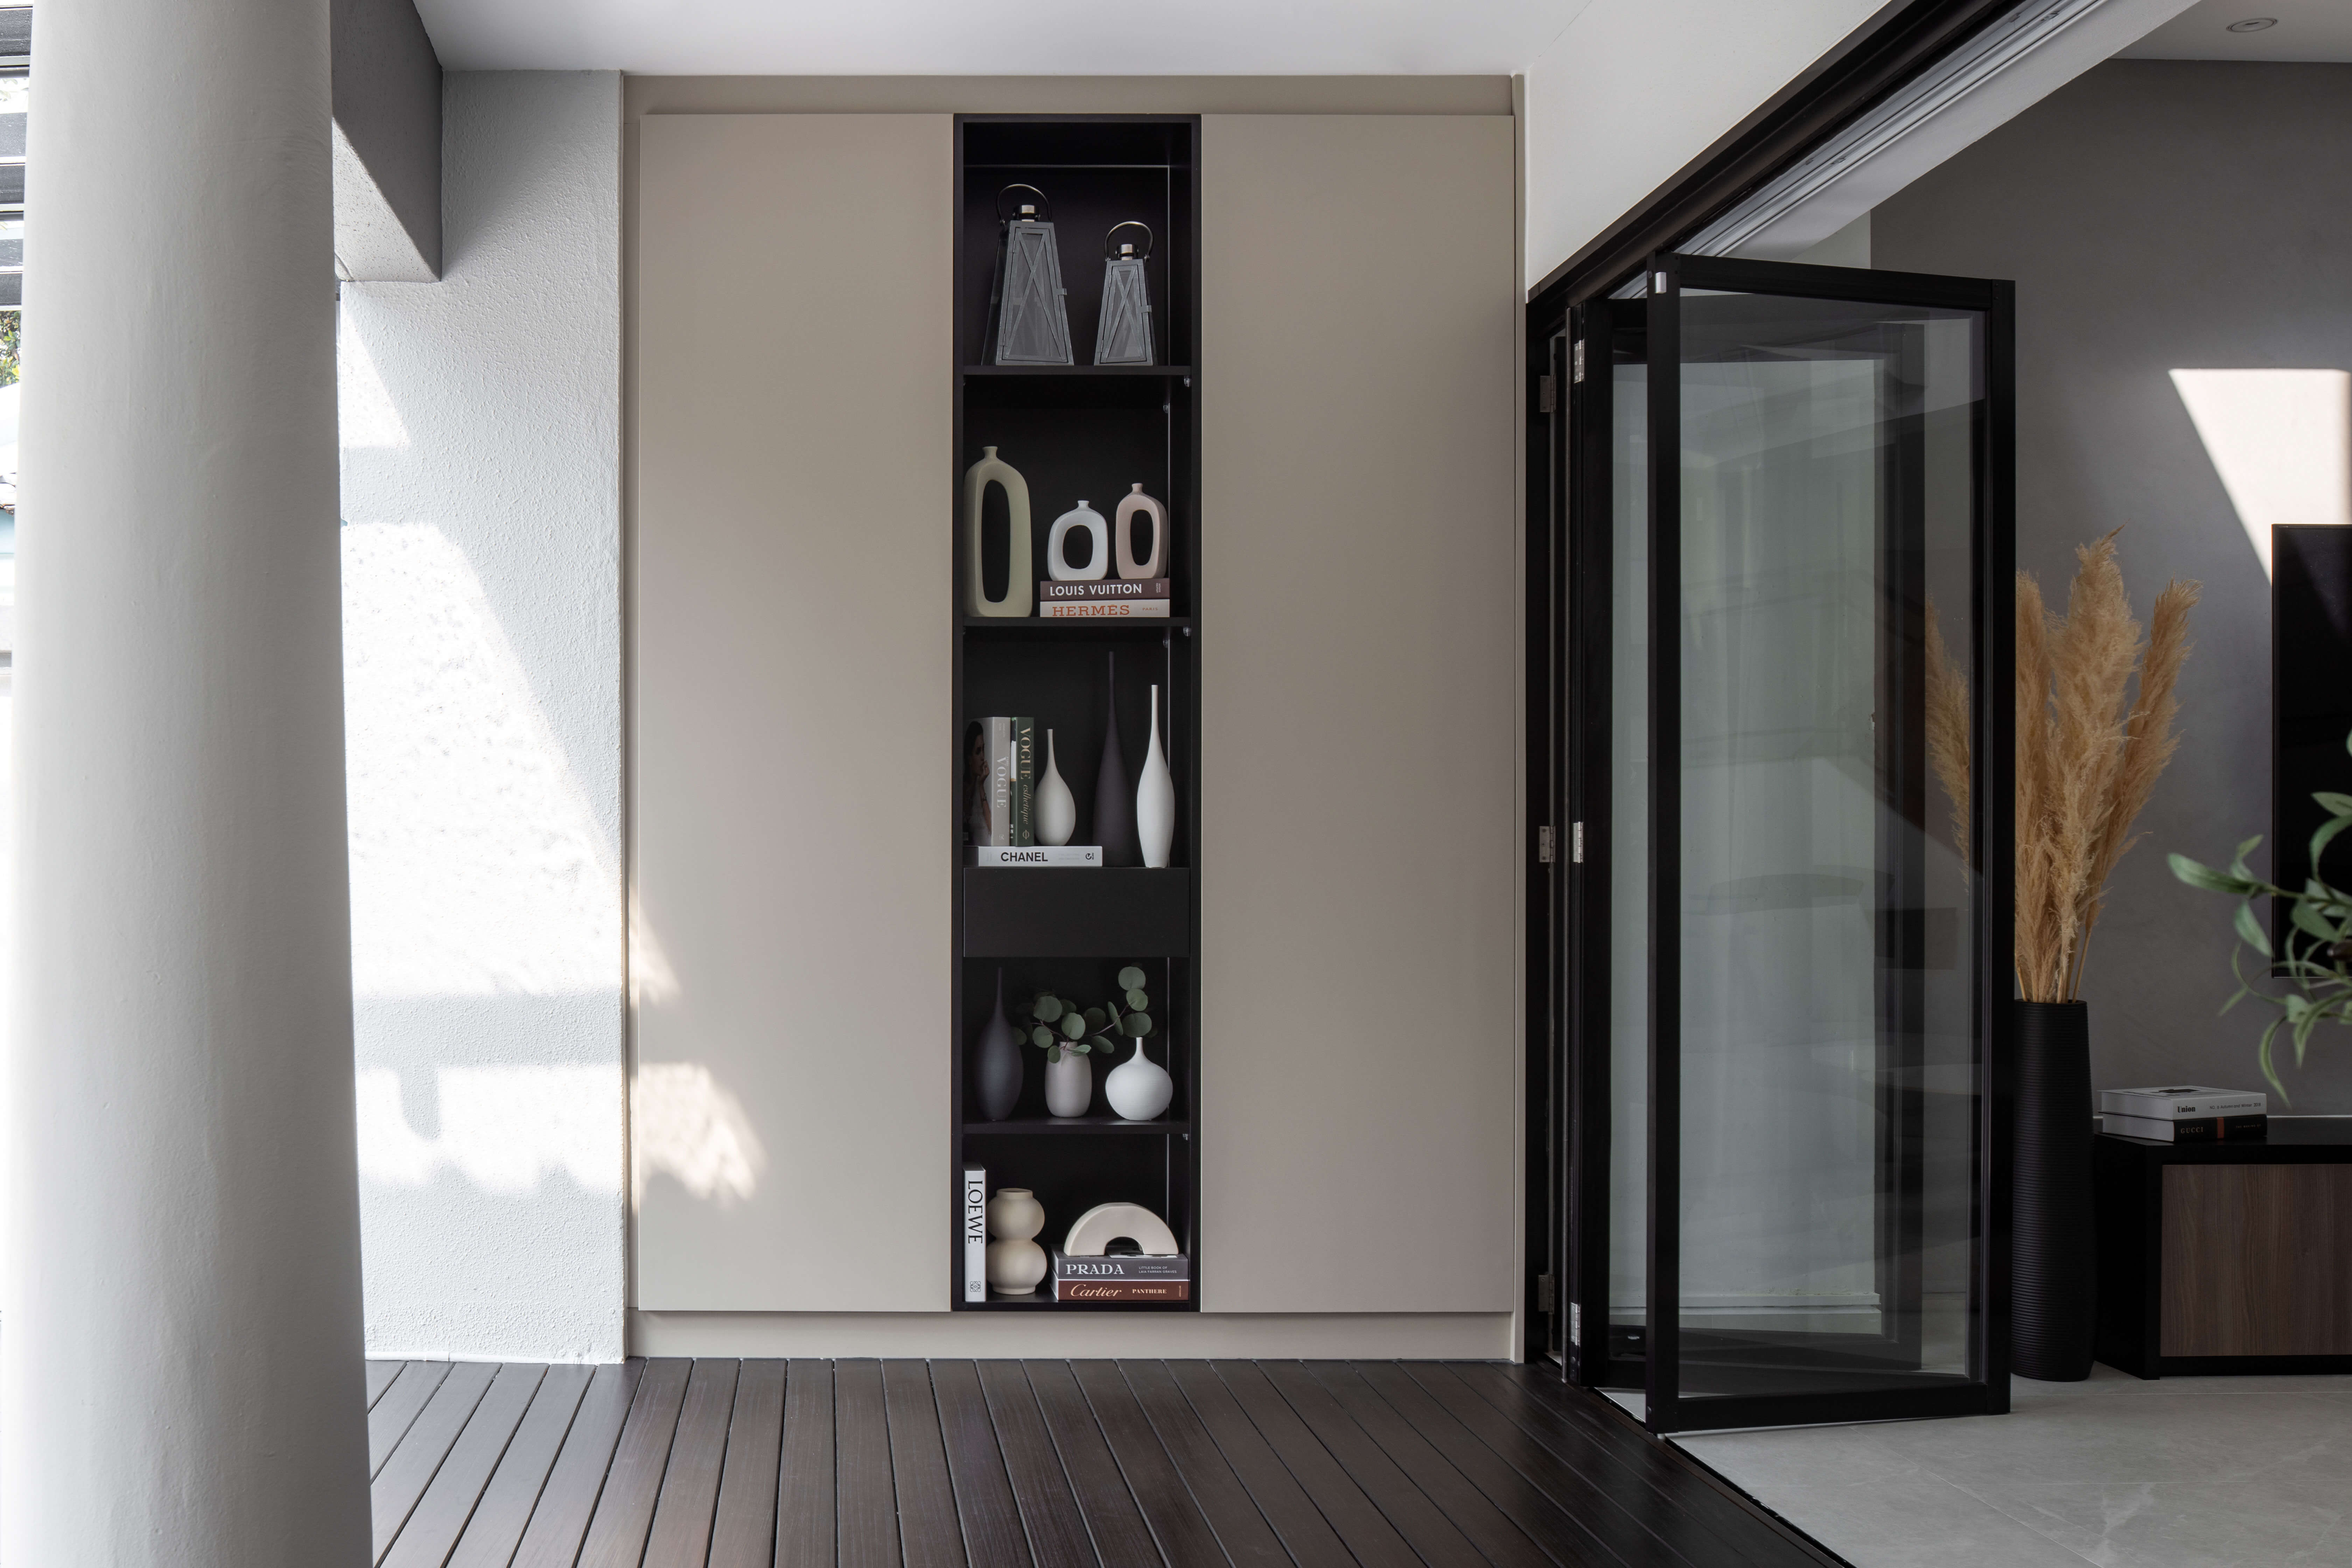 Chic display shelf with minimalist decor and designer books, nestled in a corner by glass-panelled doors, complementing the dark wooden flooring.